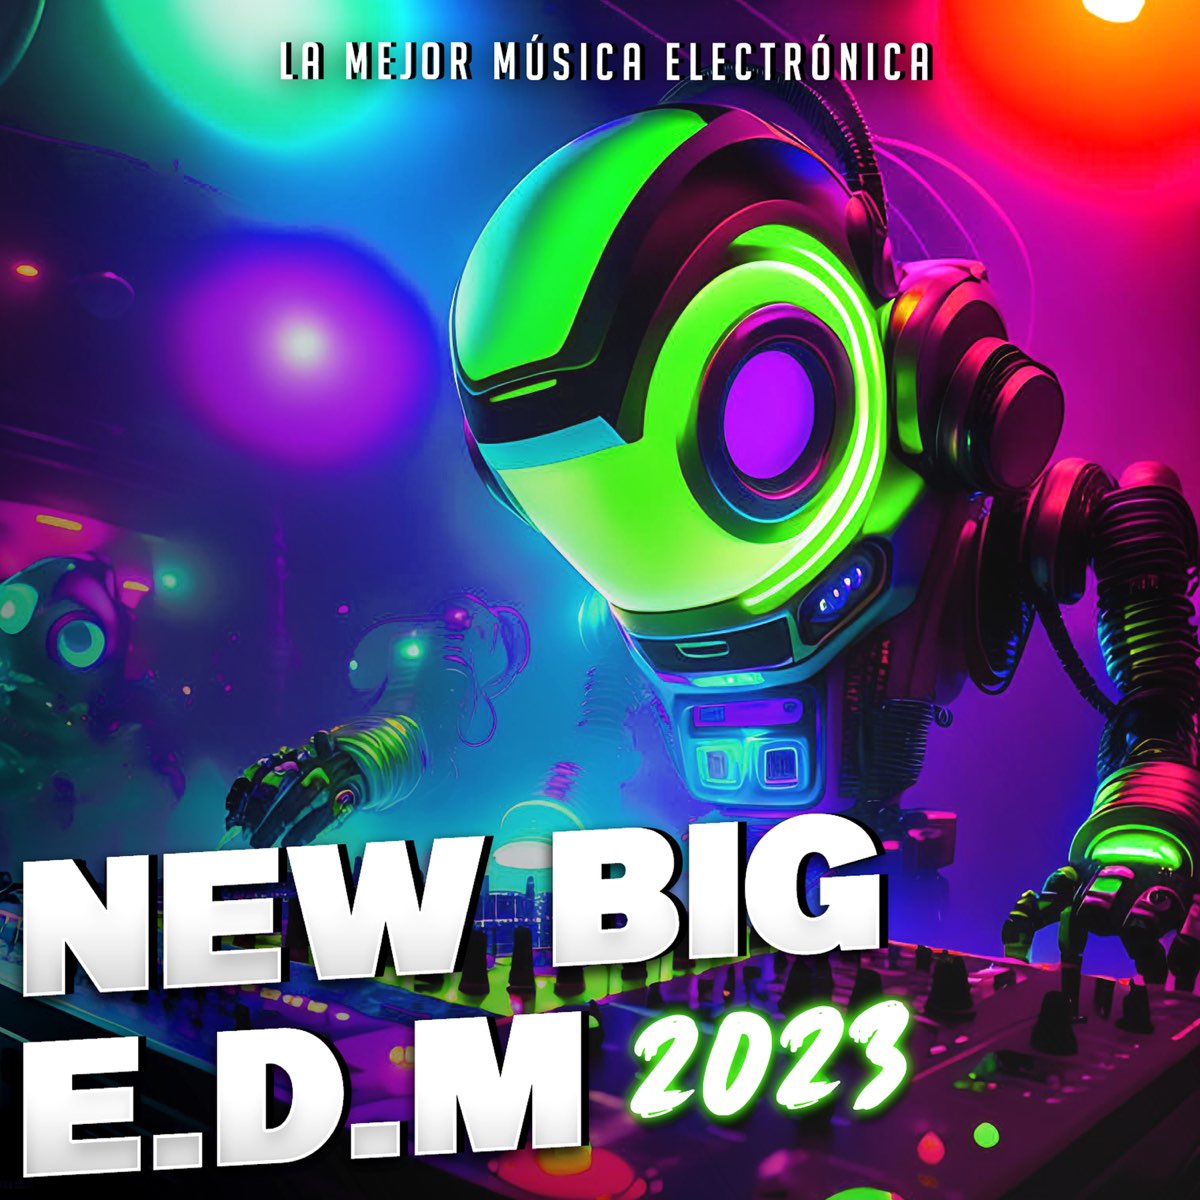 Play Dance Hits 2023 by La Mejor Música Electrónica on  Music